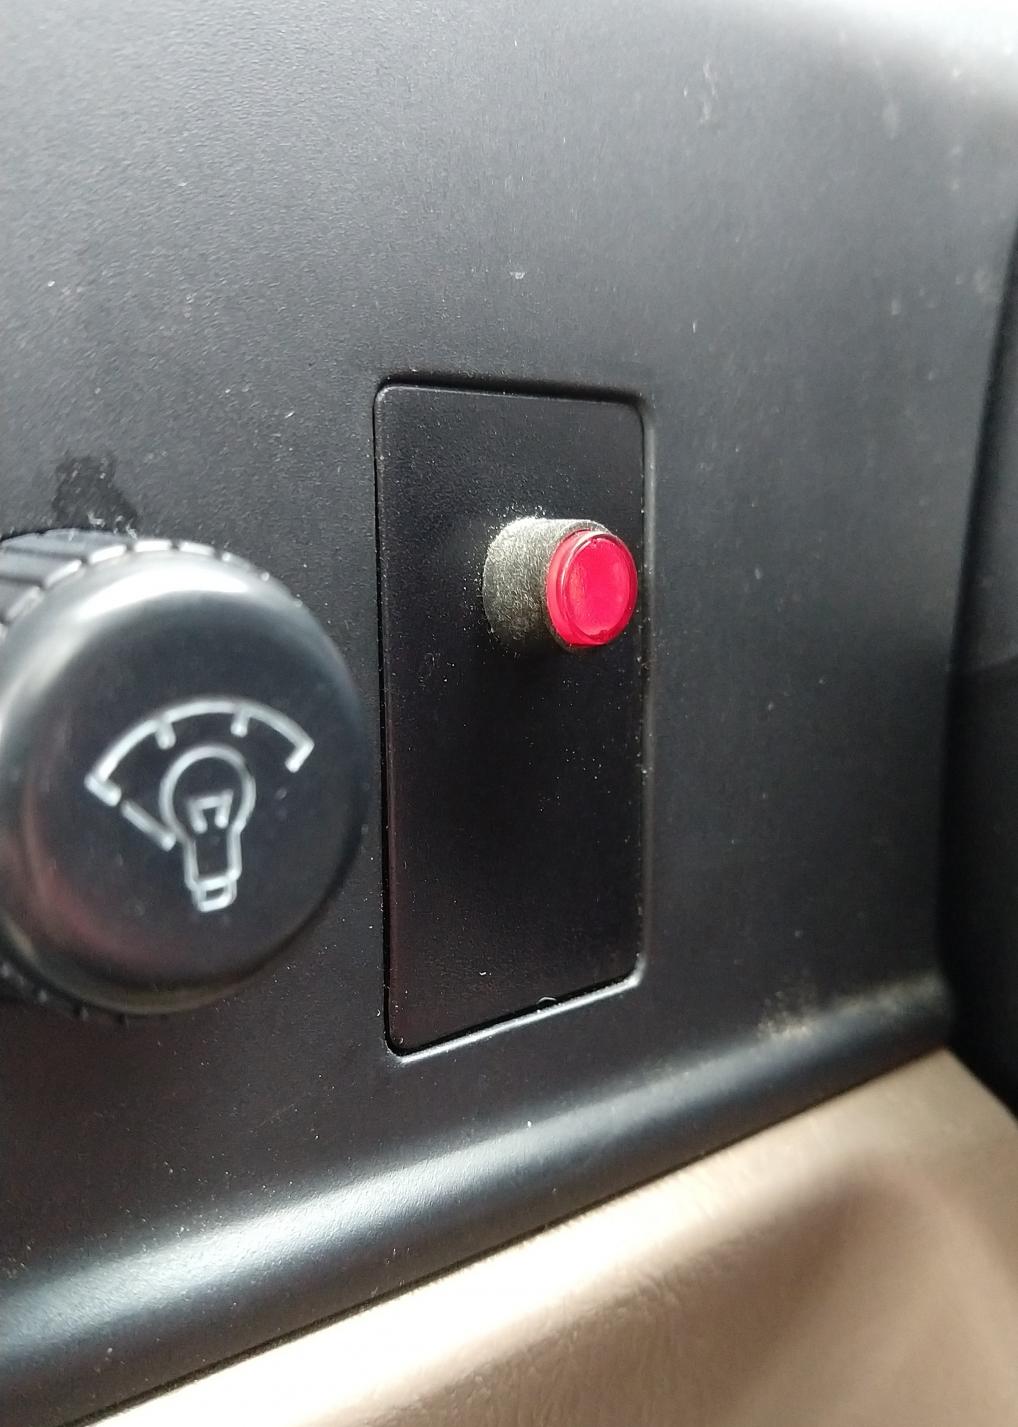 Security system issue after replacing battery (HELP!)-1997-4runner-security-button-light-jpg